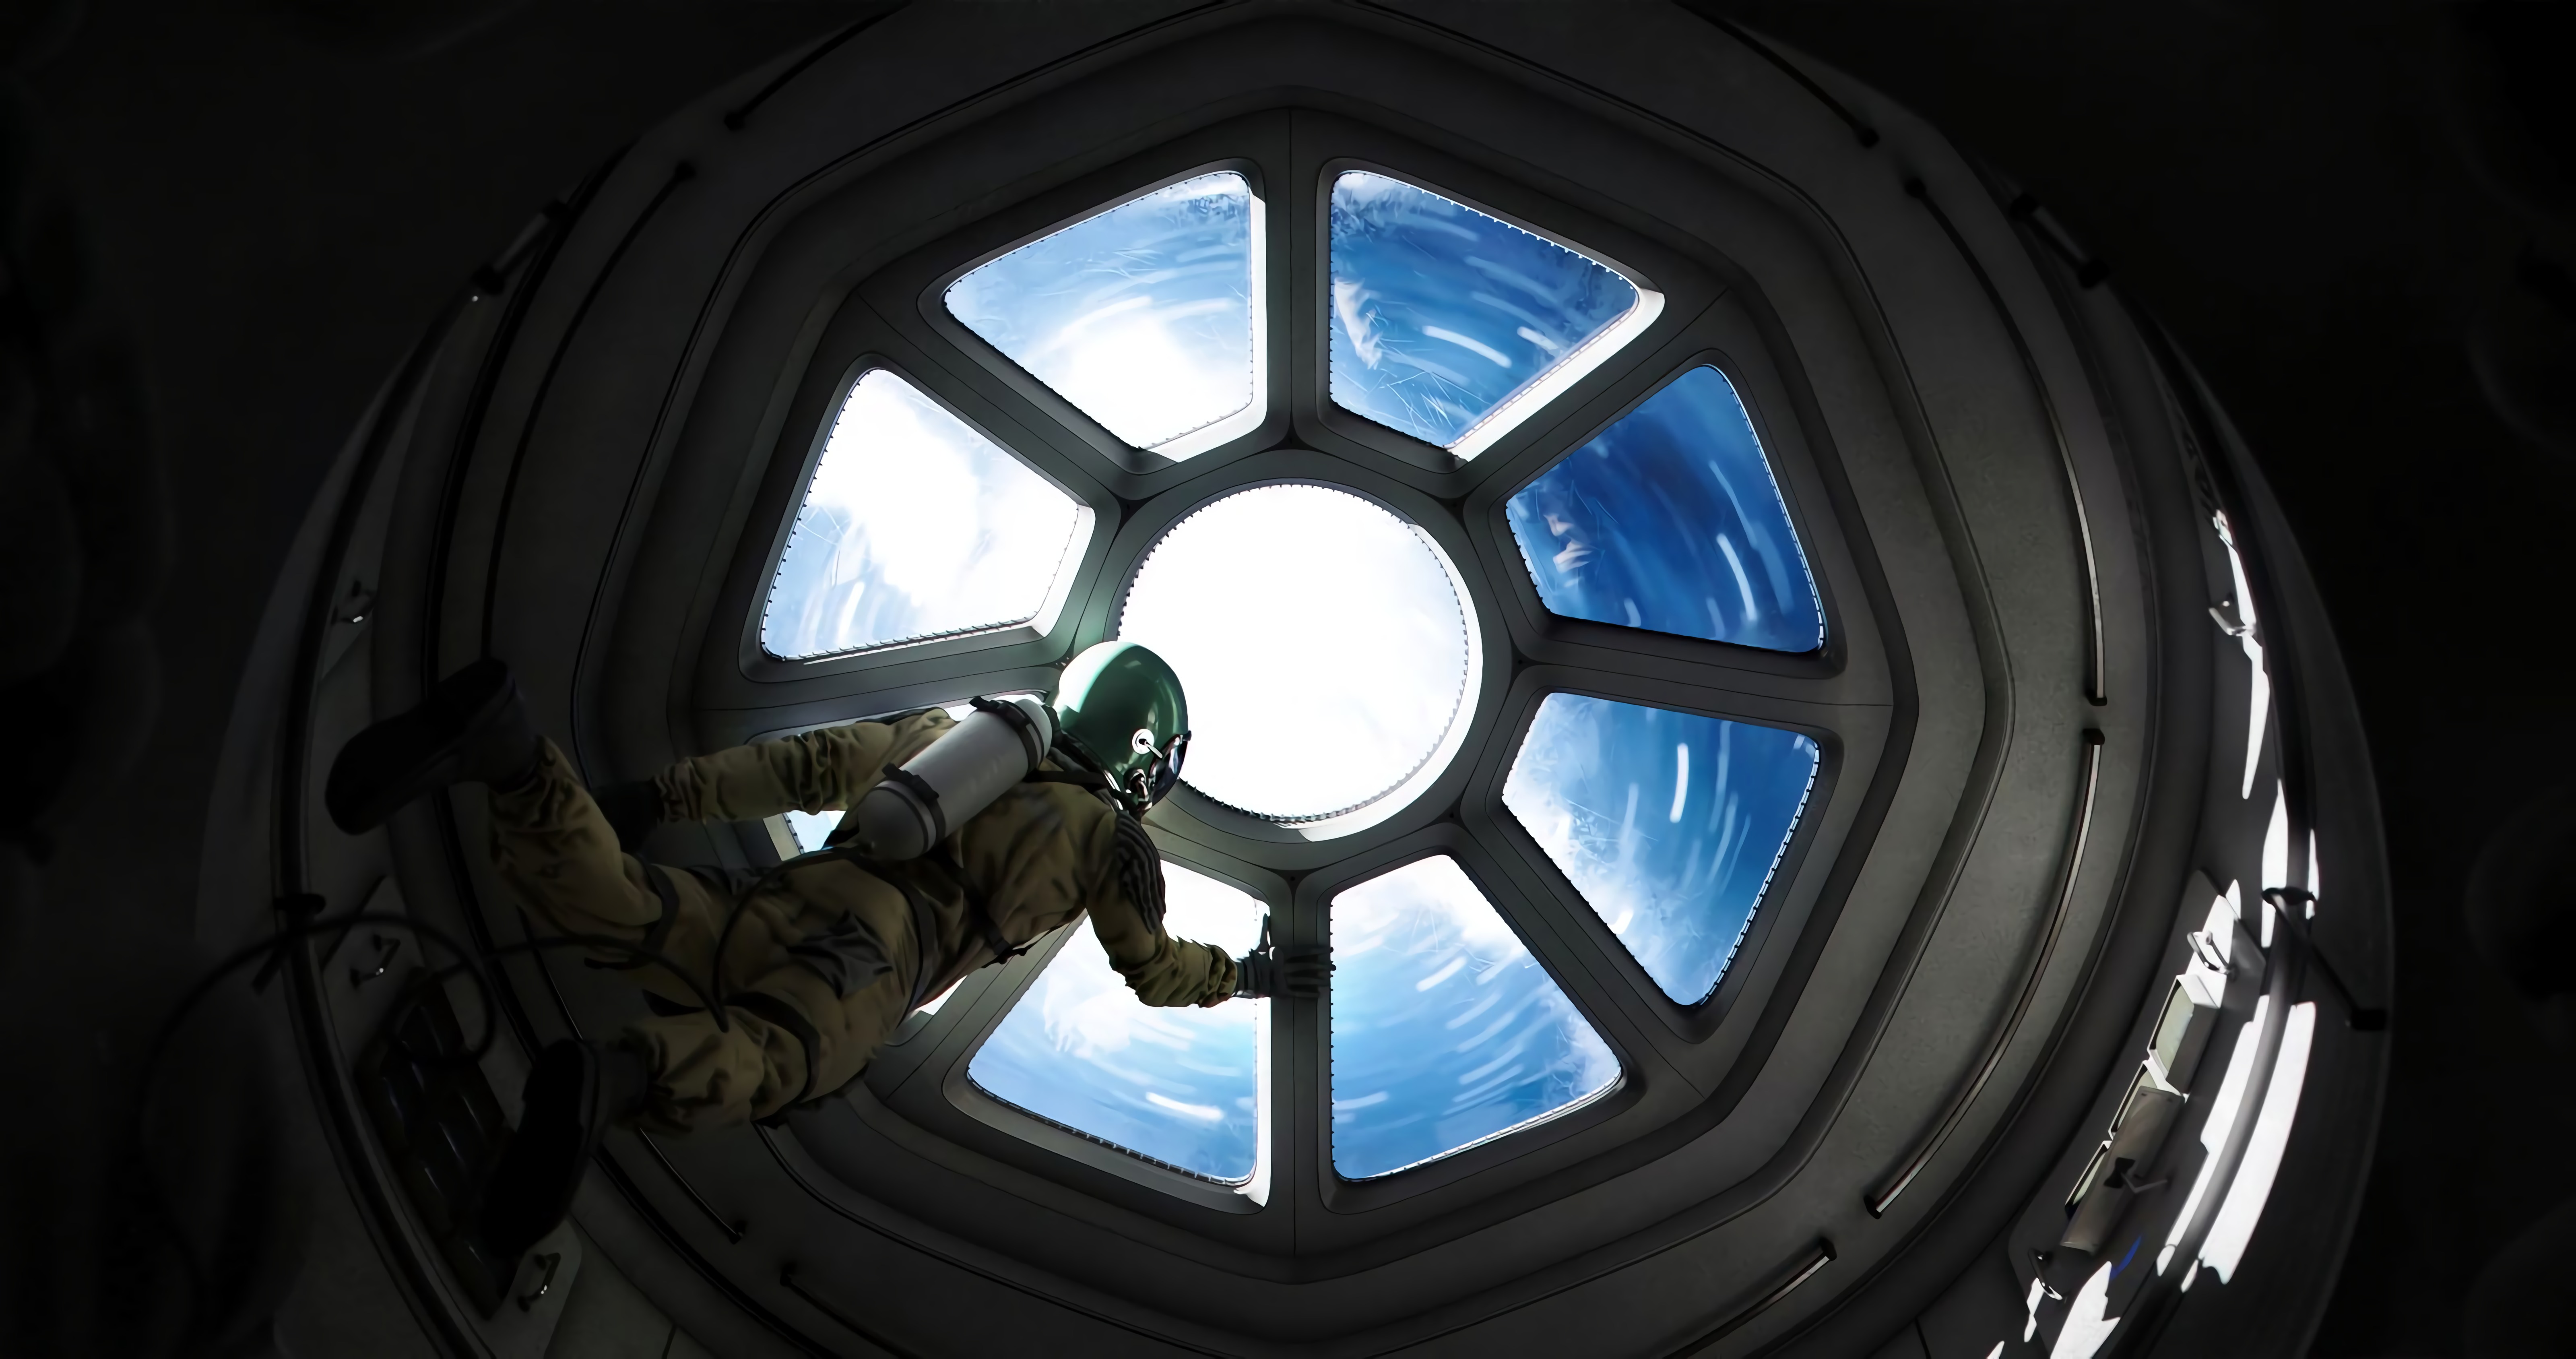 gravity, universe, porthole, spaceship, astronaut, weightlessness High Definition image